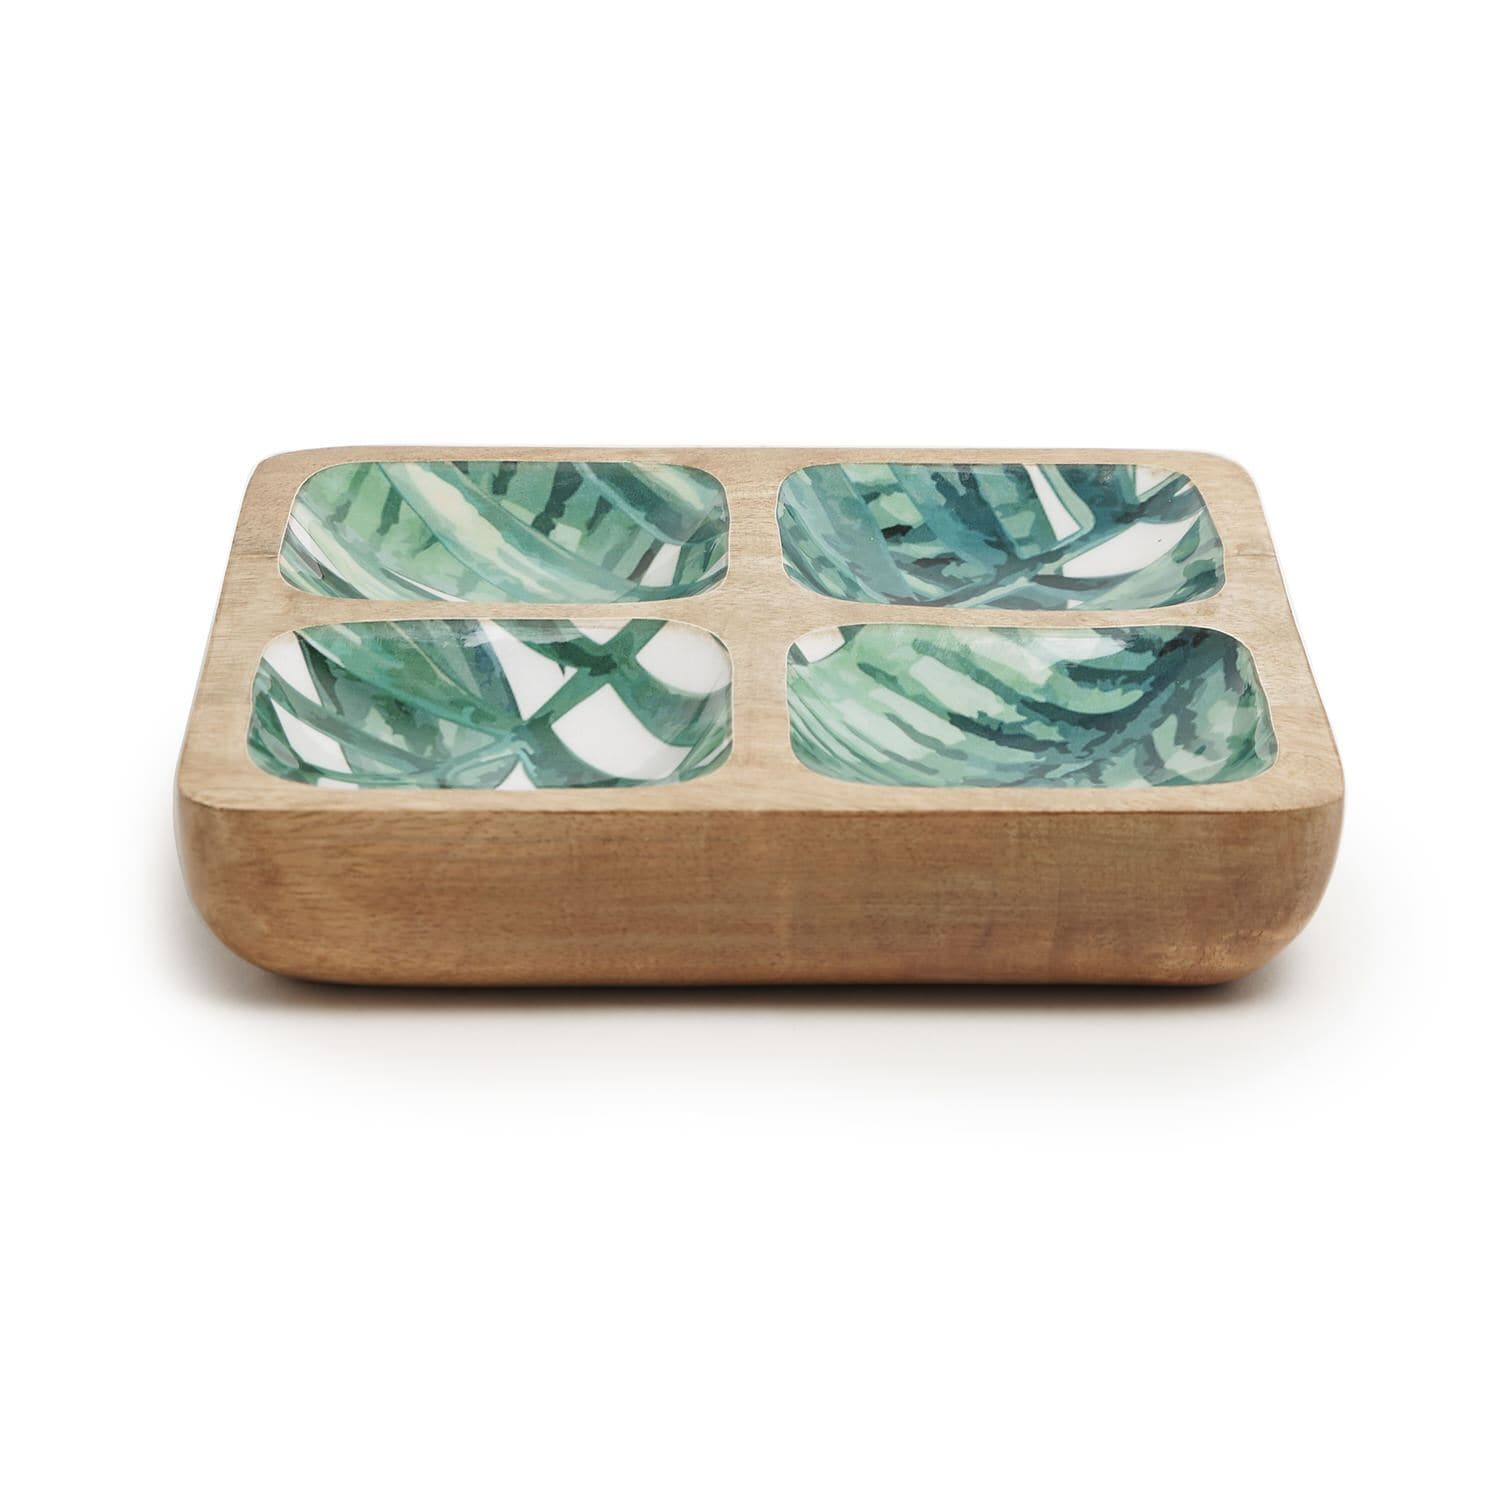 INDRA DALE SQUARE TRAY 8X8 INCHES